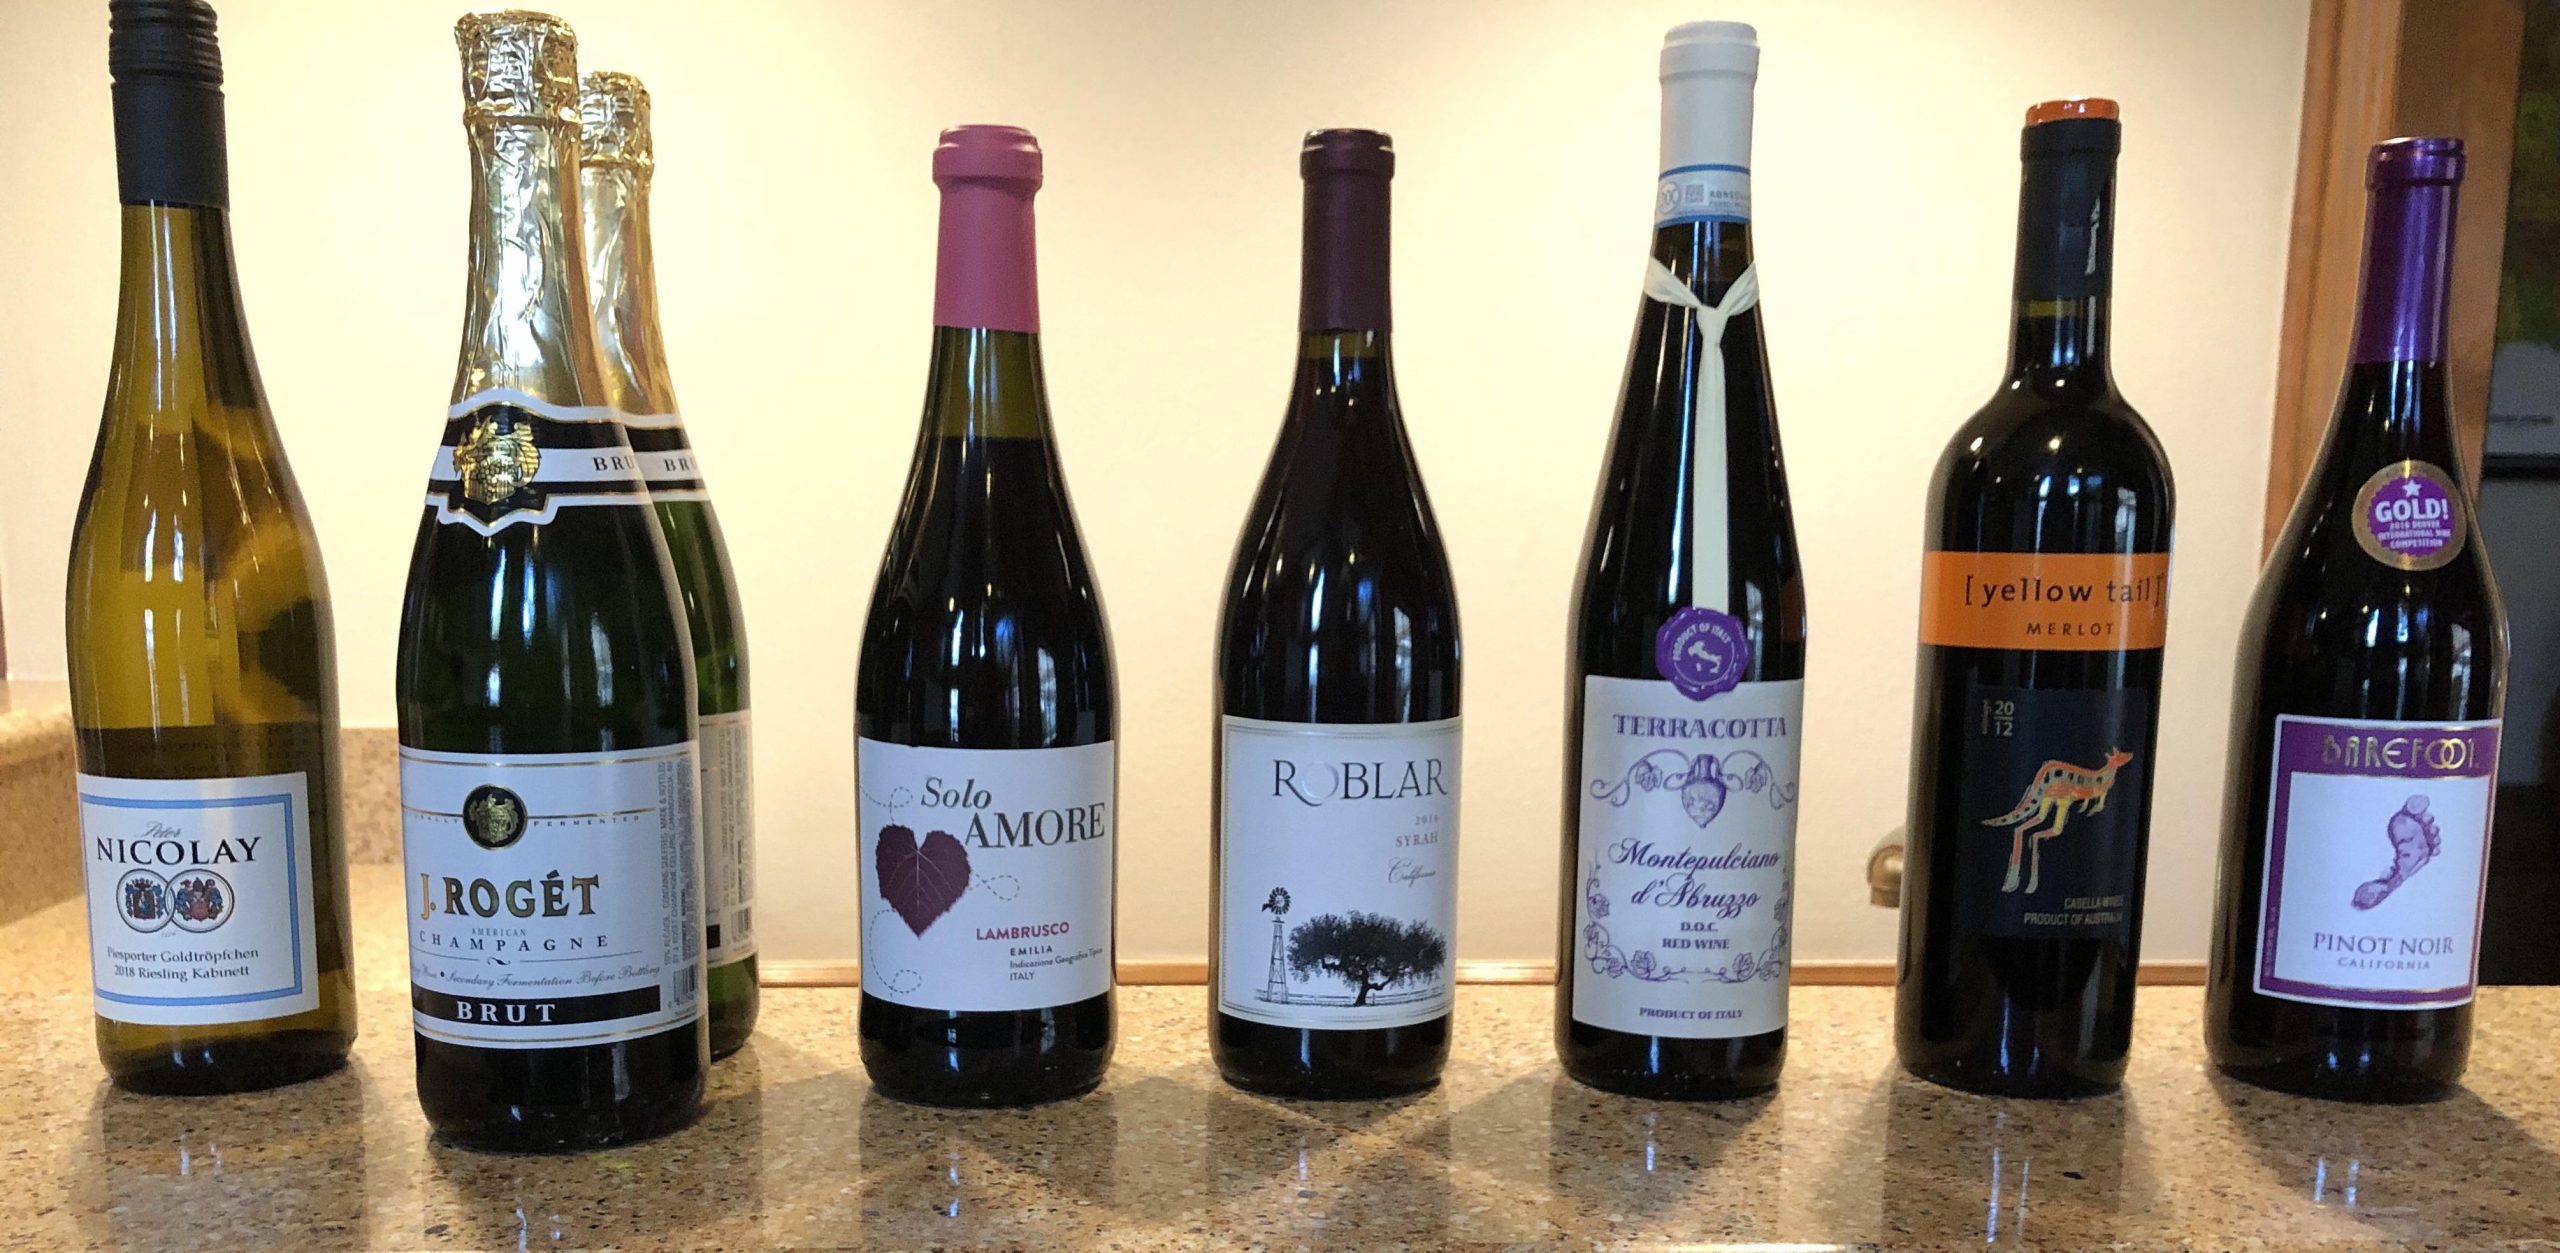 Having a wine tasting (new to this), what order should we try these? : wine